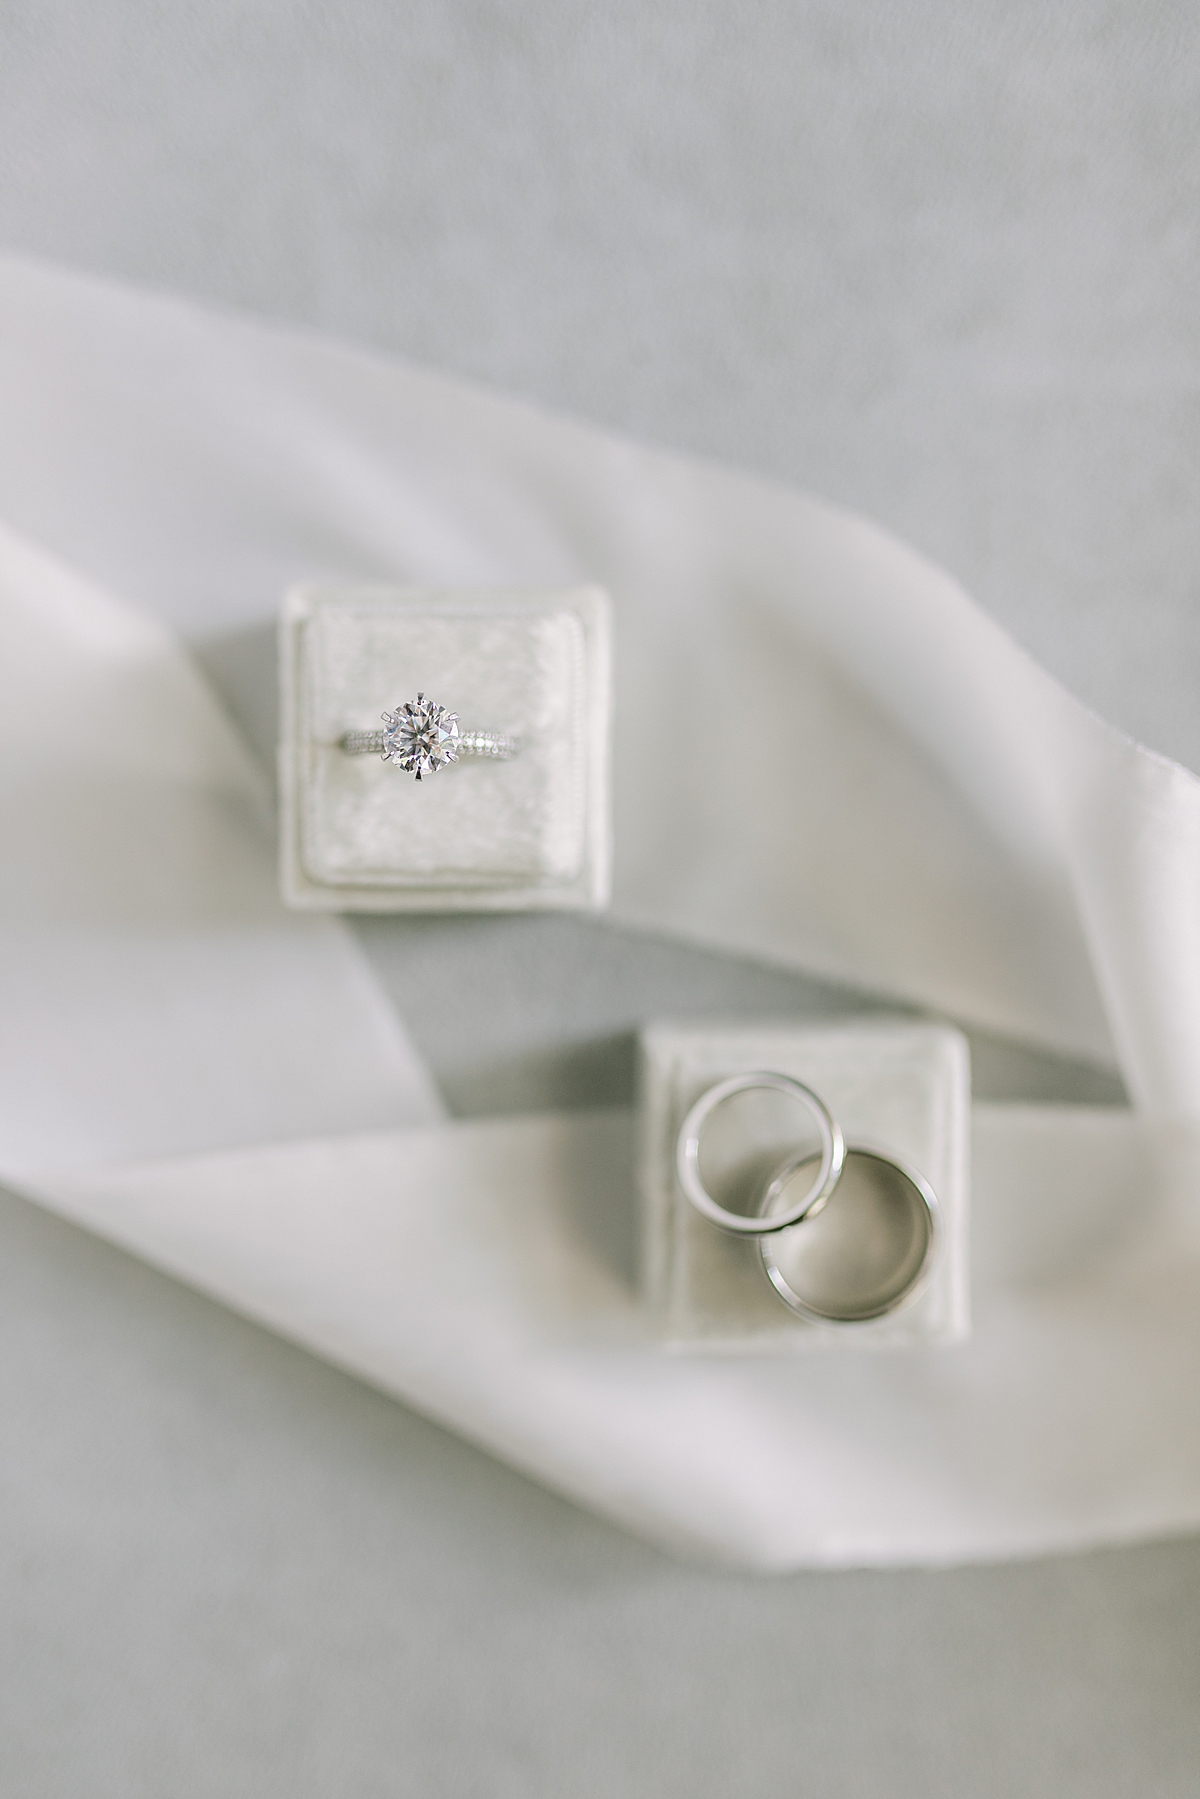 The couple's wedding bands and Erica's engagement ring in a ring box surrounded by white ribbon.